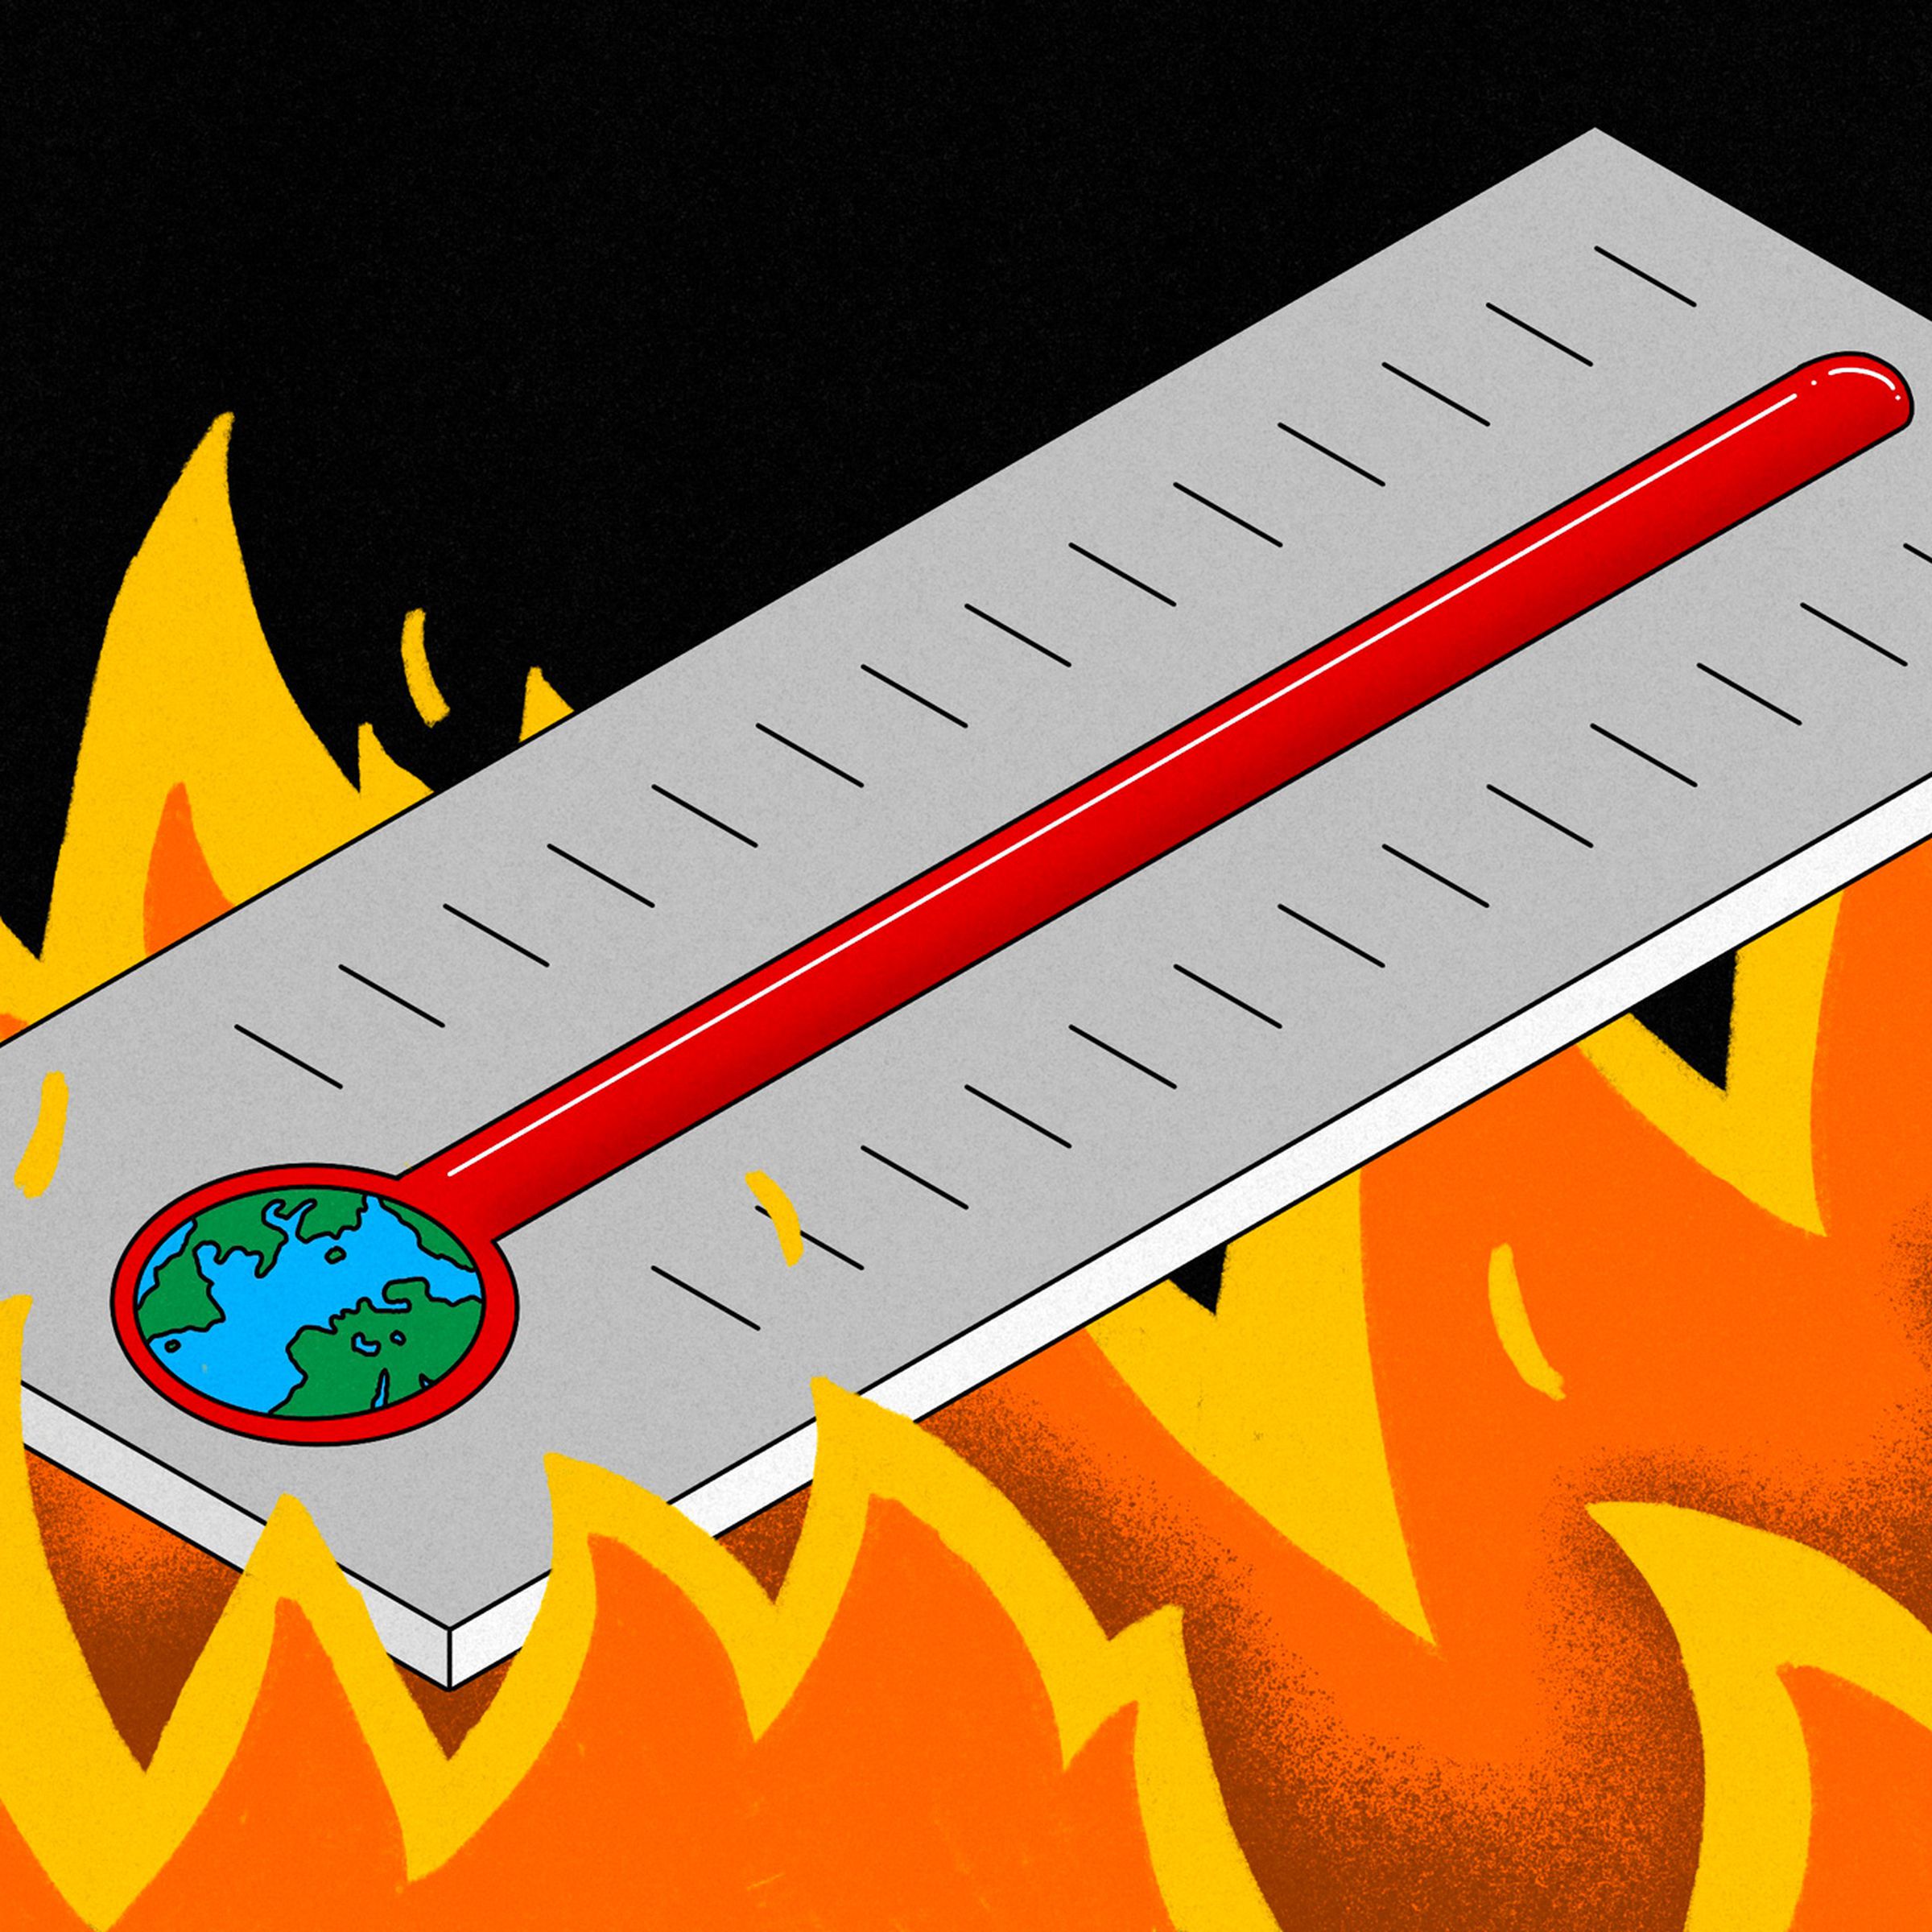 Art depicting a red thermometer above flames